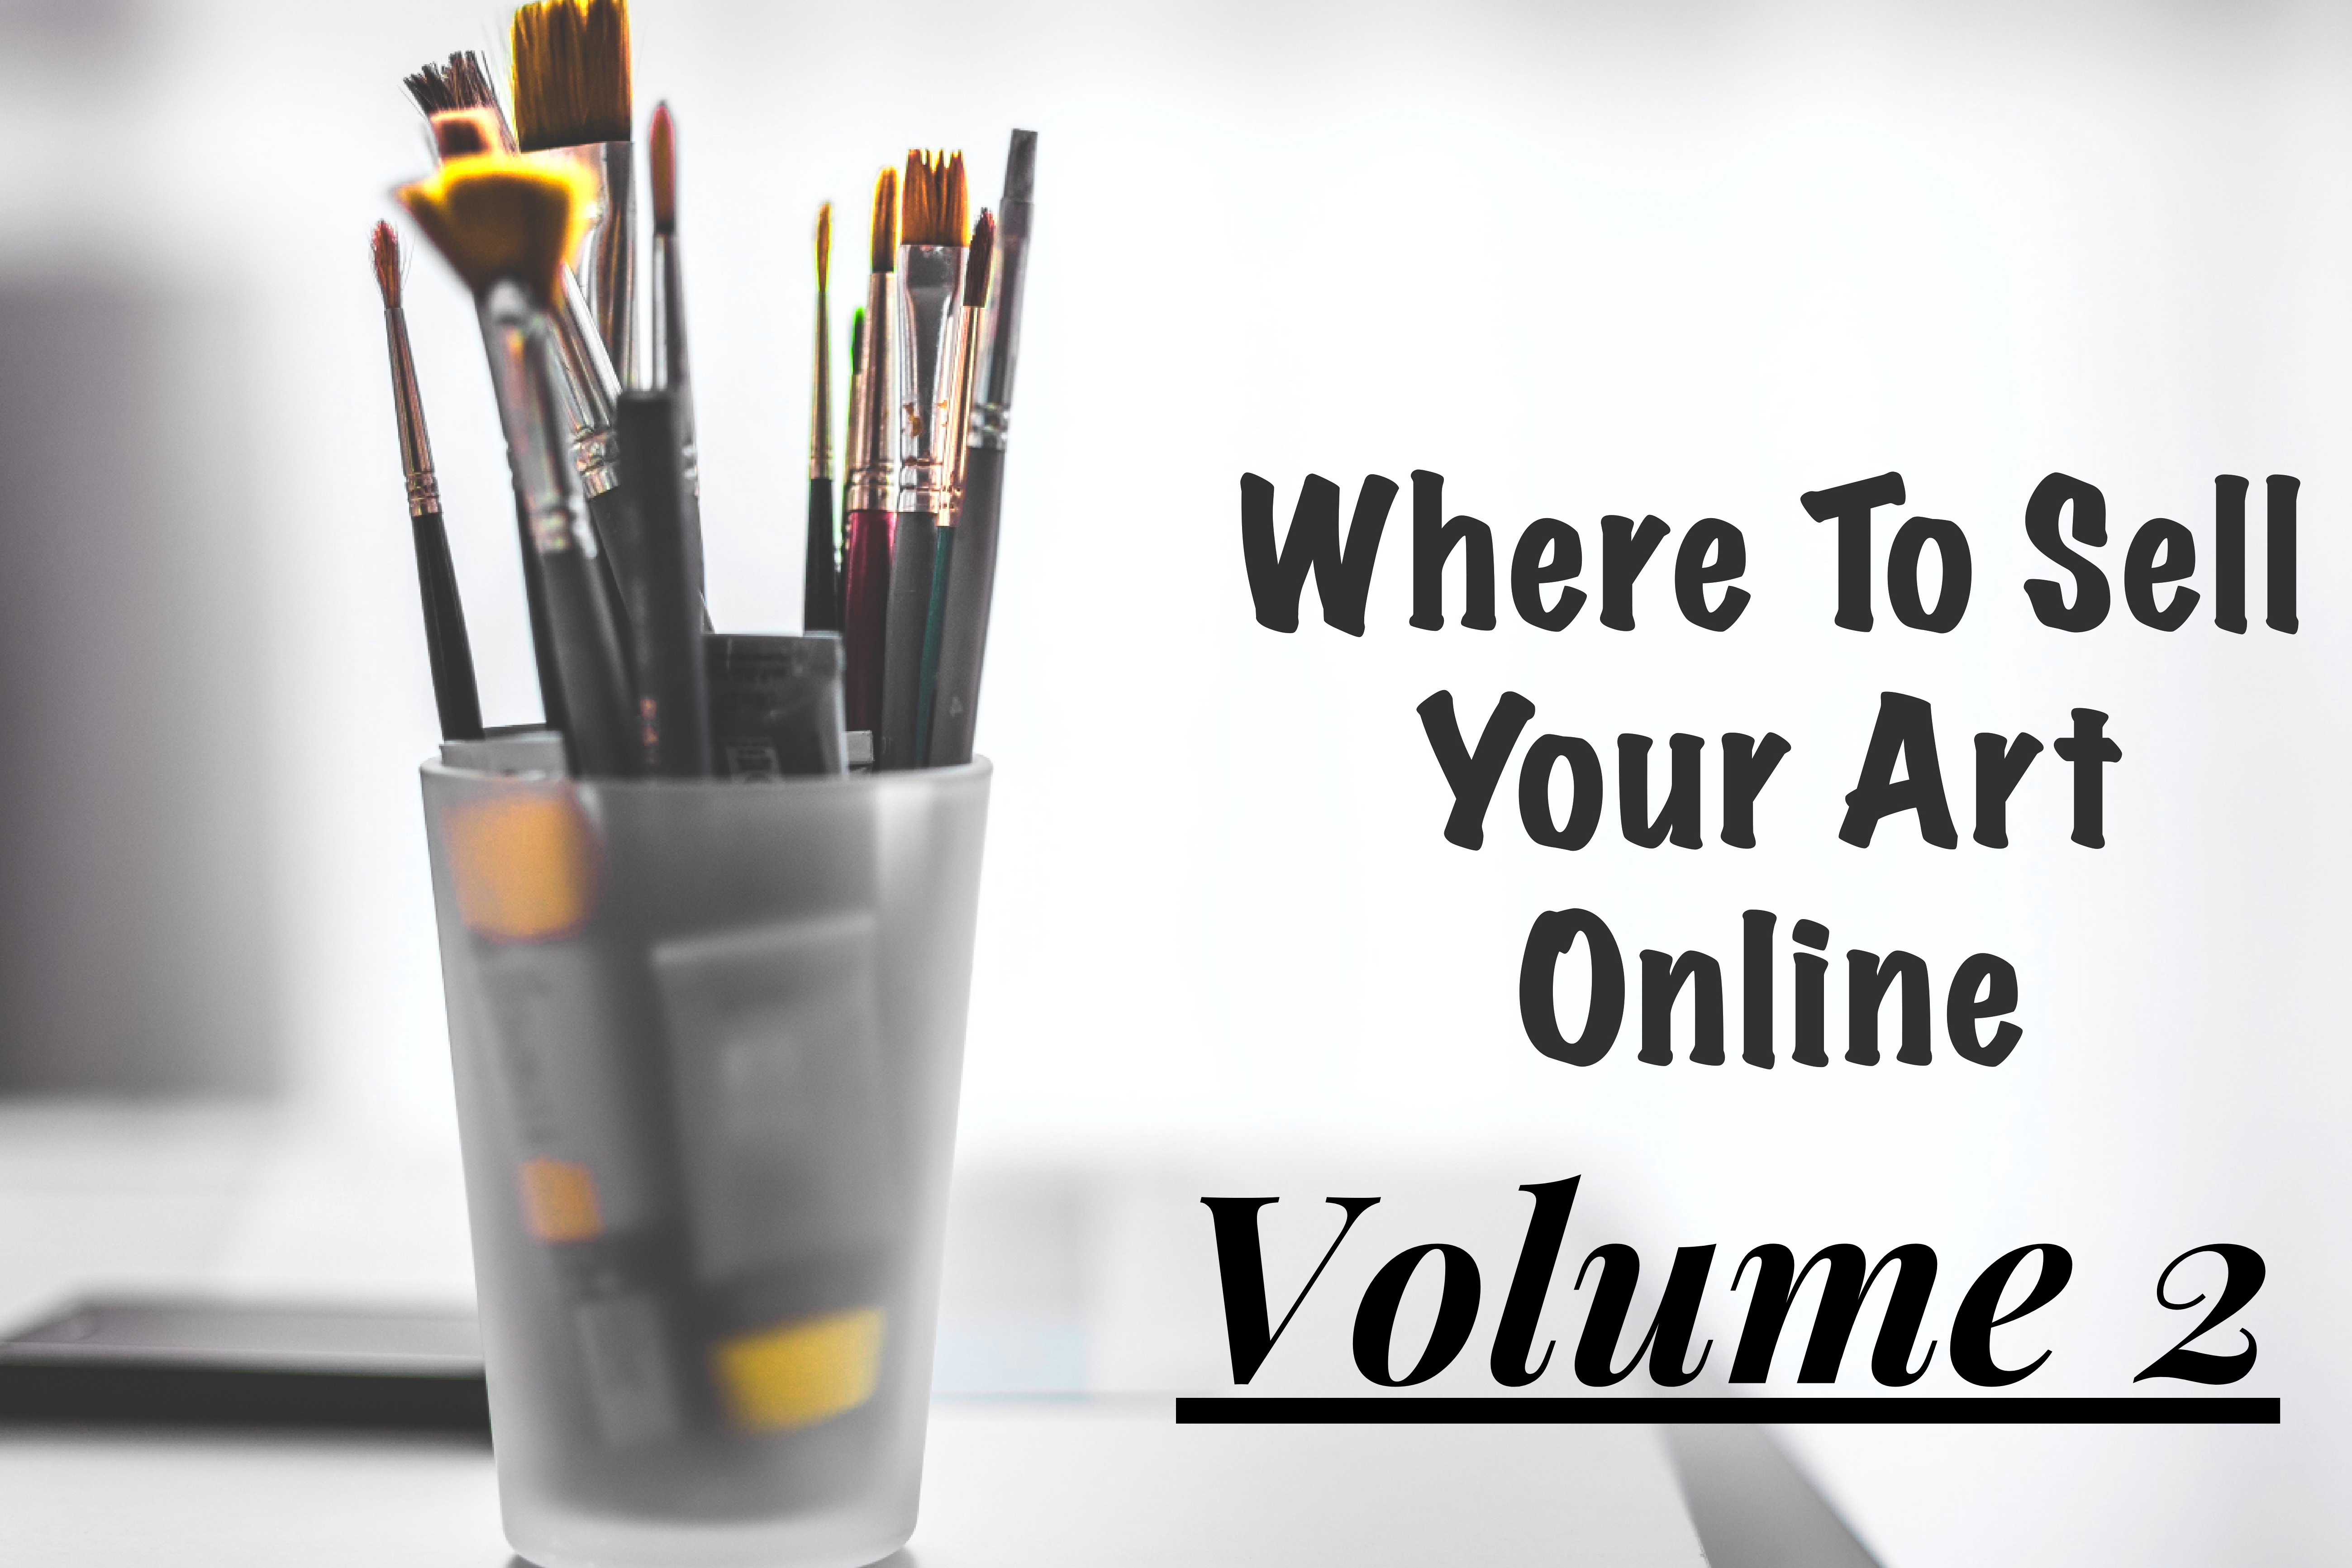 Where To Sell Your Art Online – Volume 2